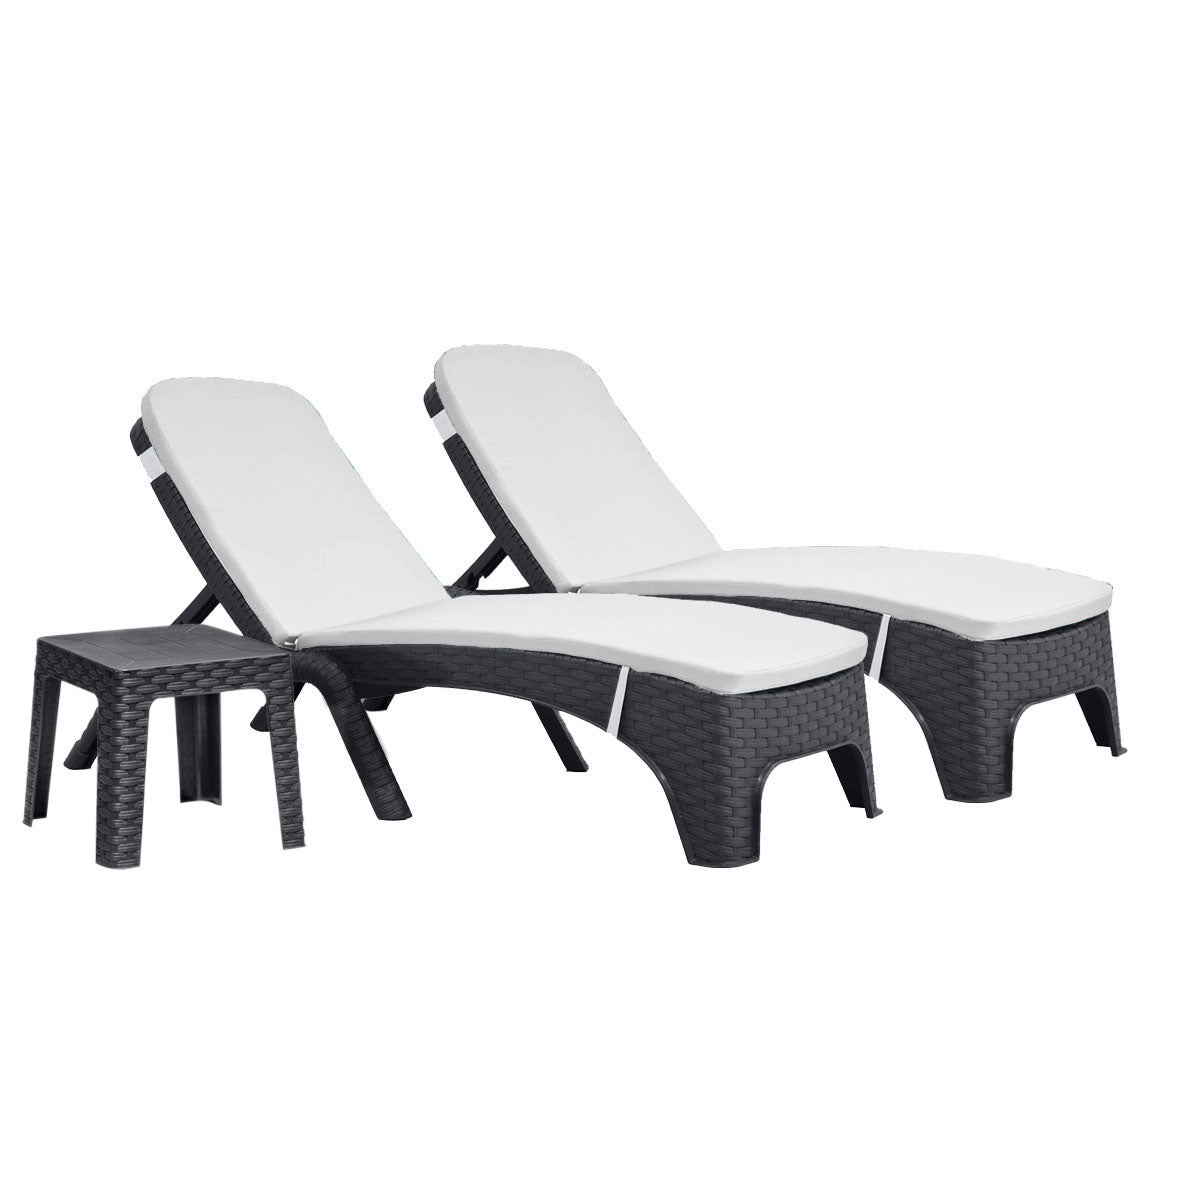 Rainbow Outdoor Roma 3-Piece Chaise Lounger Set-Anthracite with Cushion